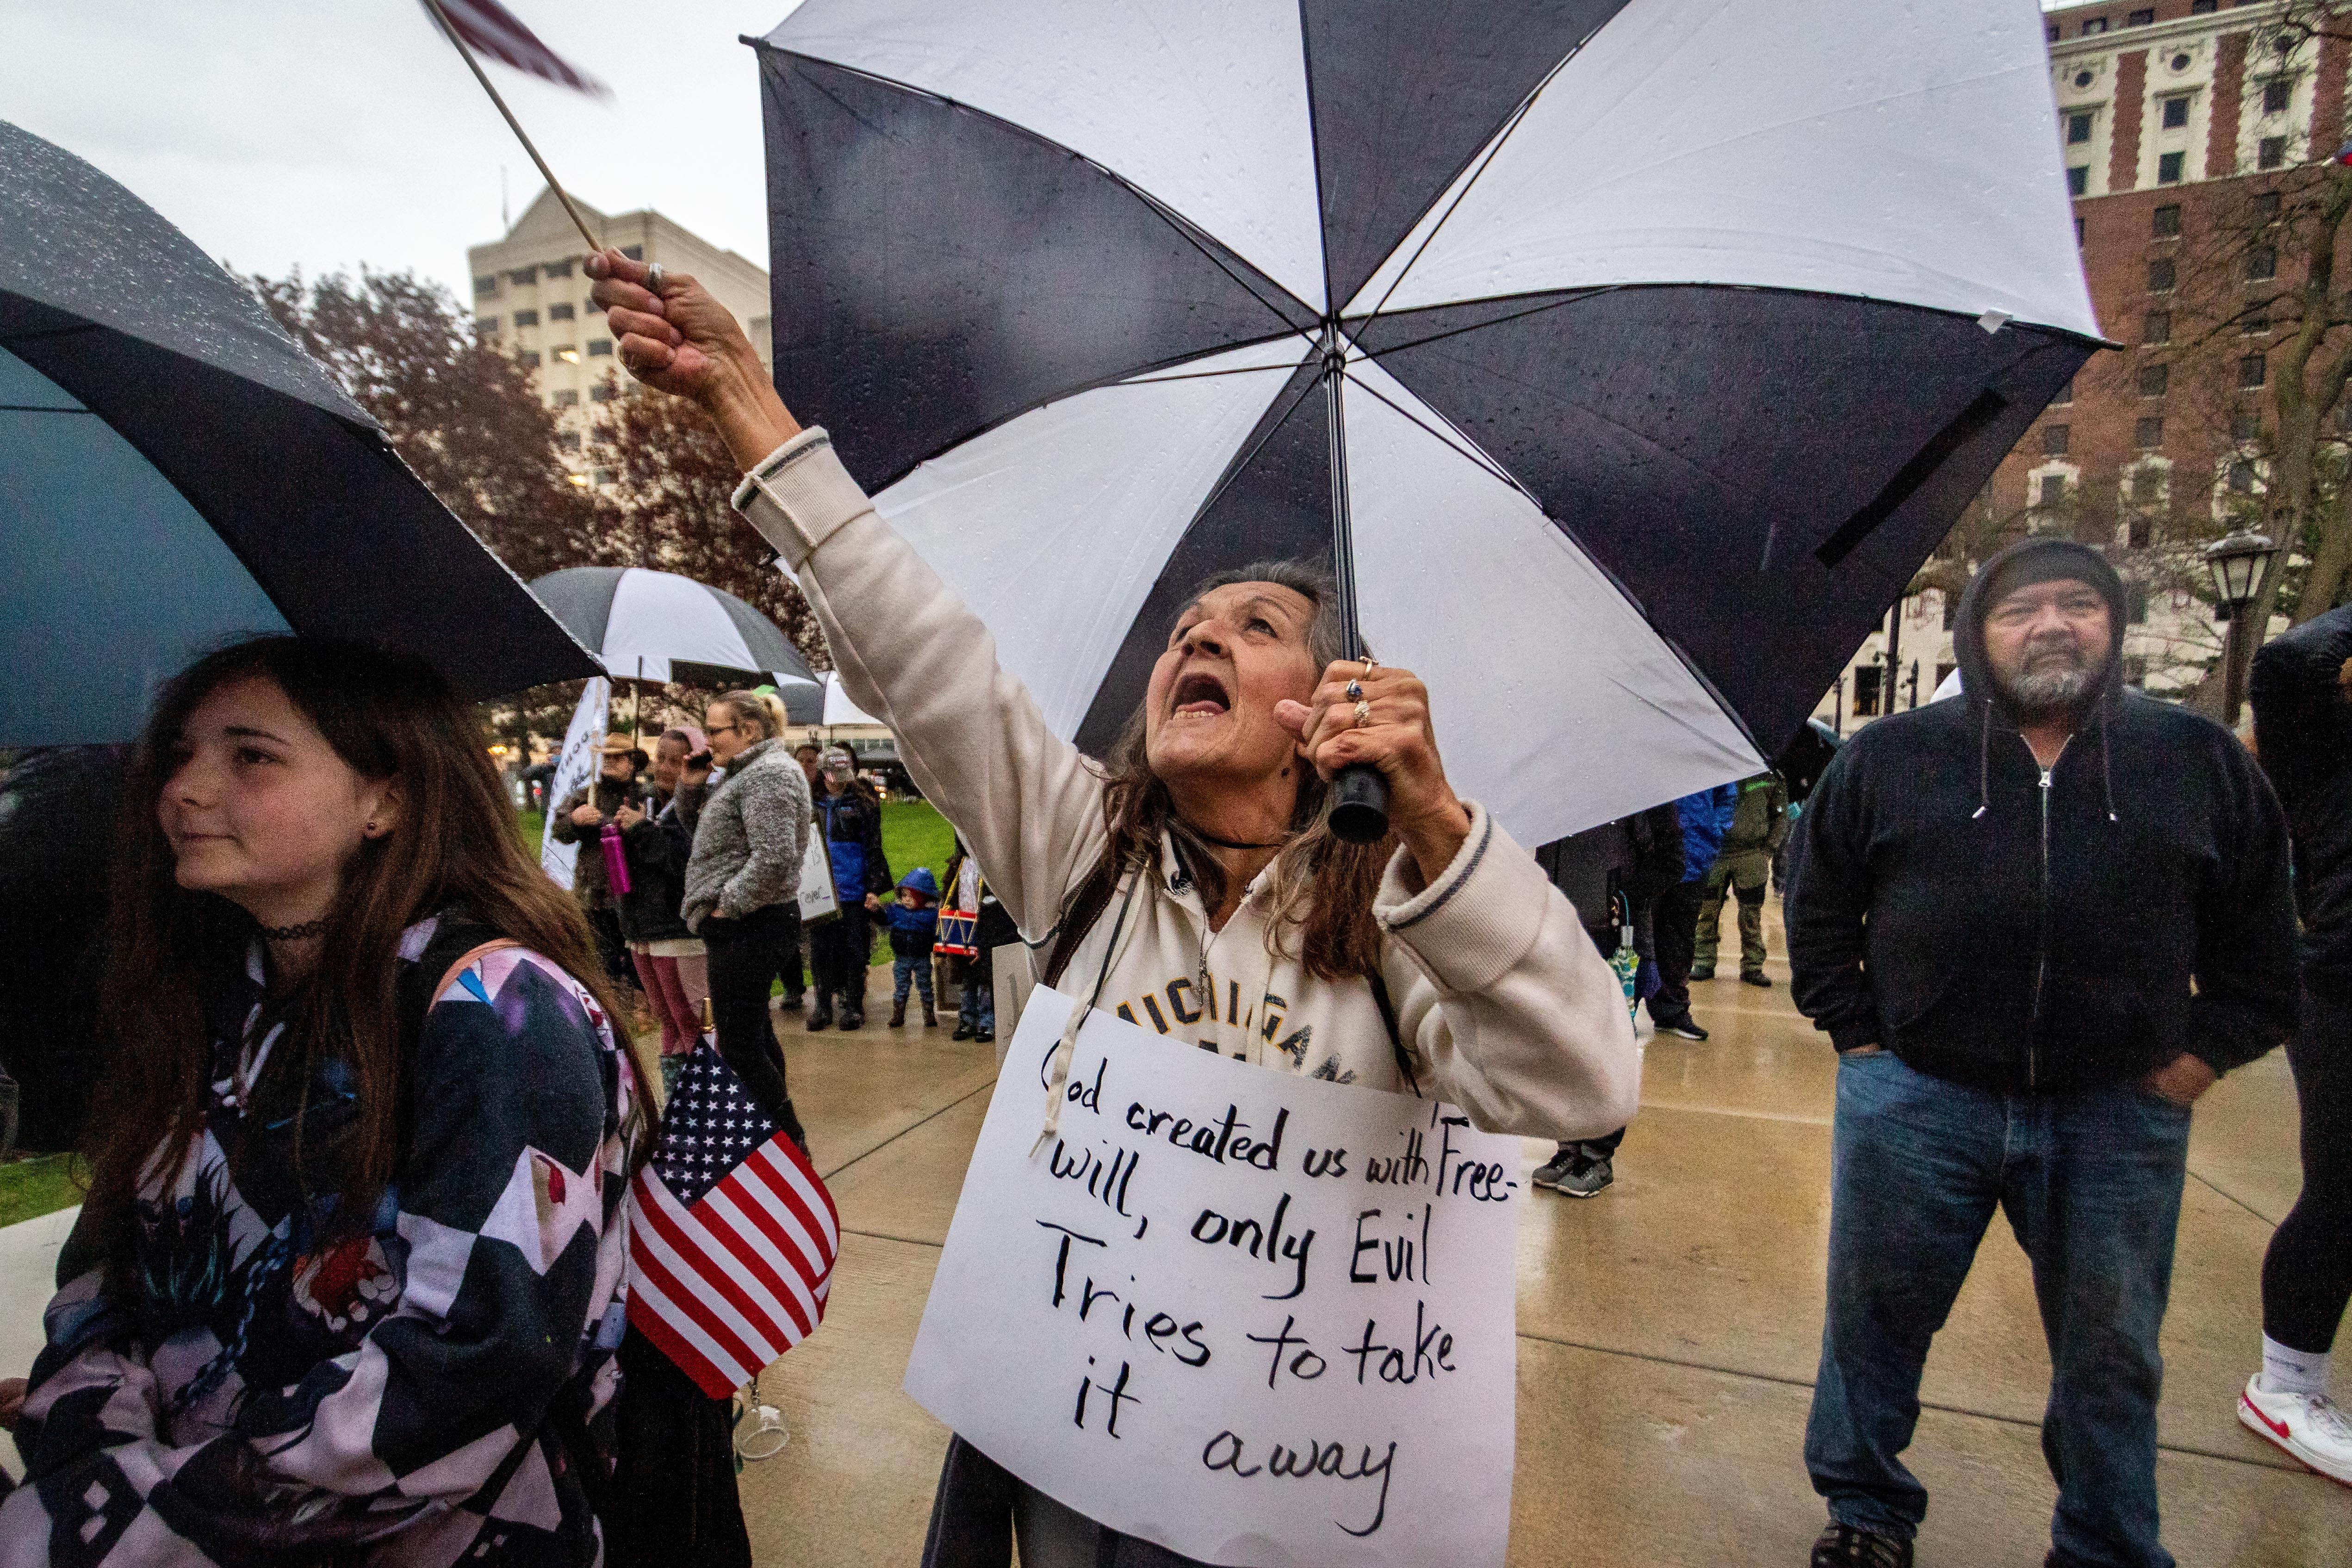 Daleleen (she would only give her first name) of White Pigeon, Michigan yells during a protest at the state Capitol to oppose the executive orders Governor Gretchen Whitmer issued in response to the coronavirus pandemic.